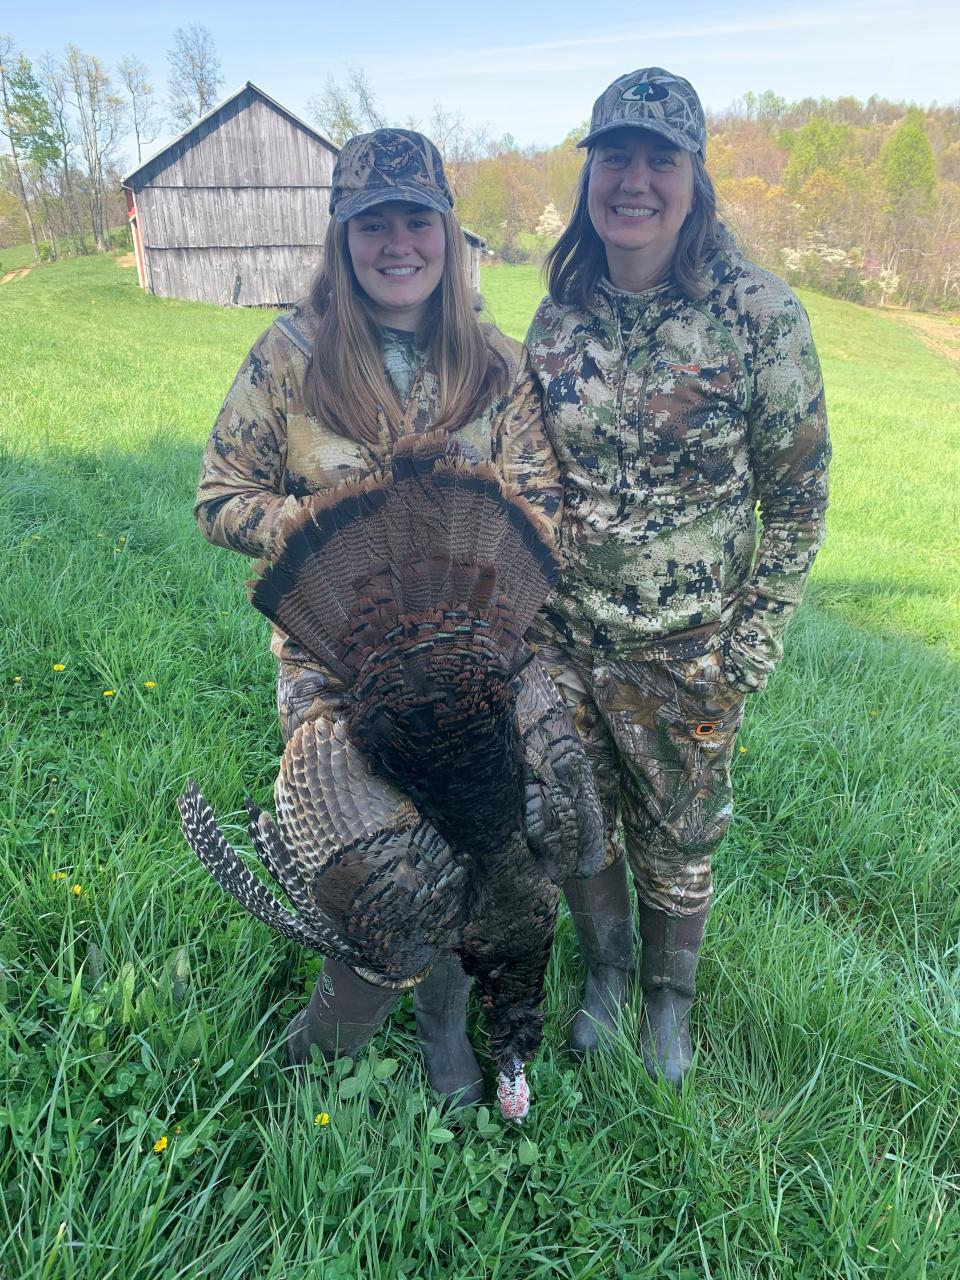 Sarah Schott, left, and her mother, Kelly, pose with a wild turkey harvested from the Schott family farm in Noble County.